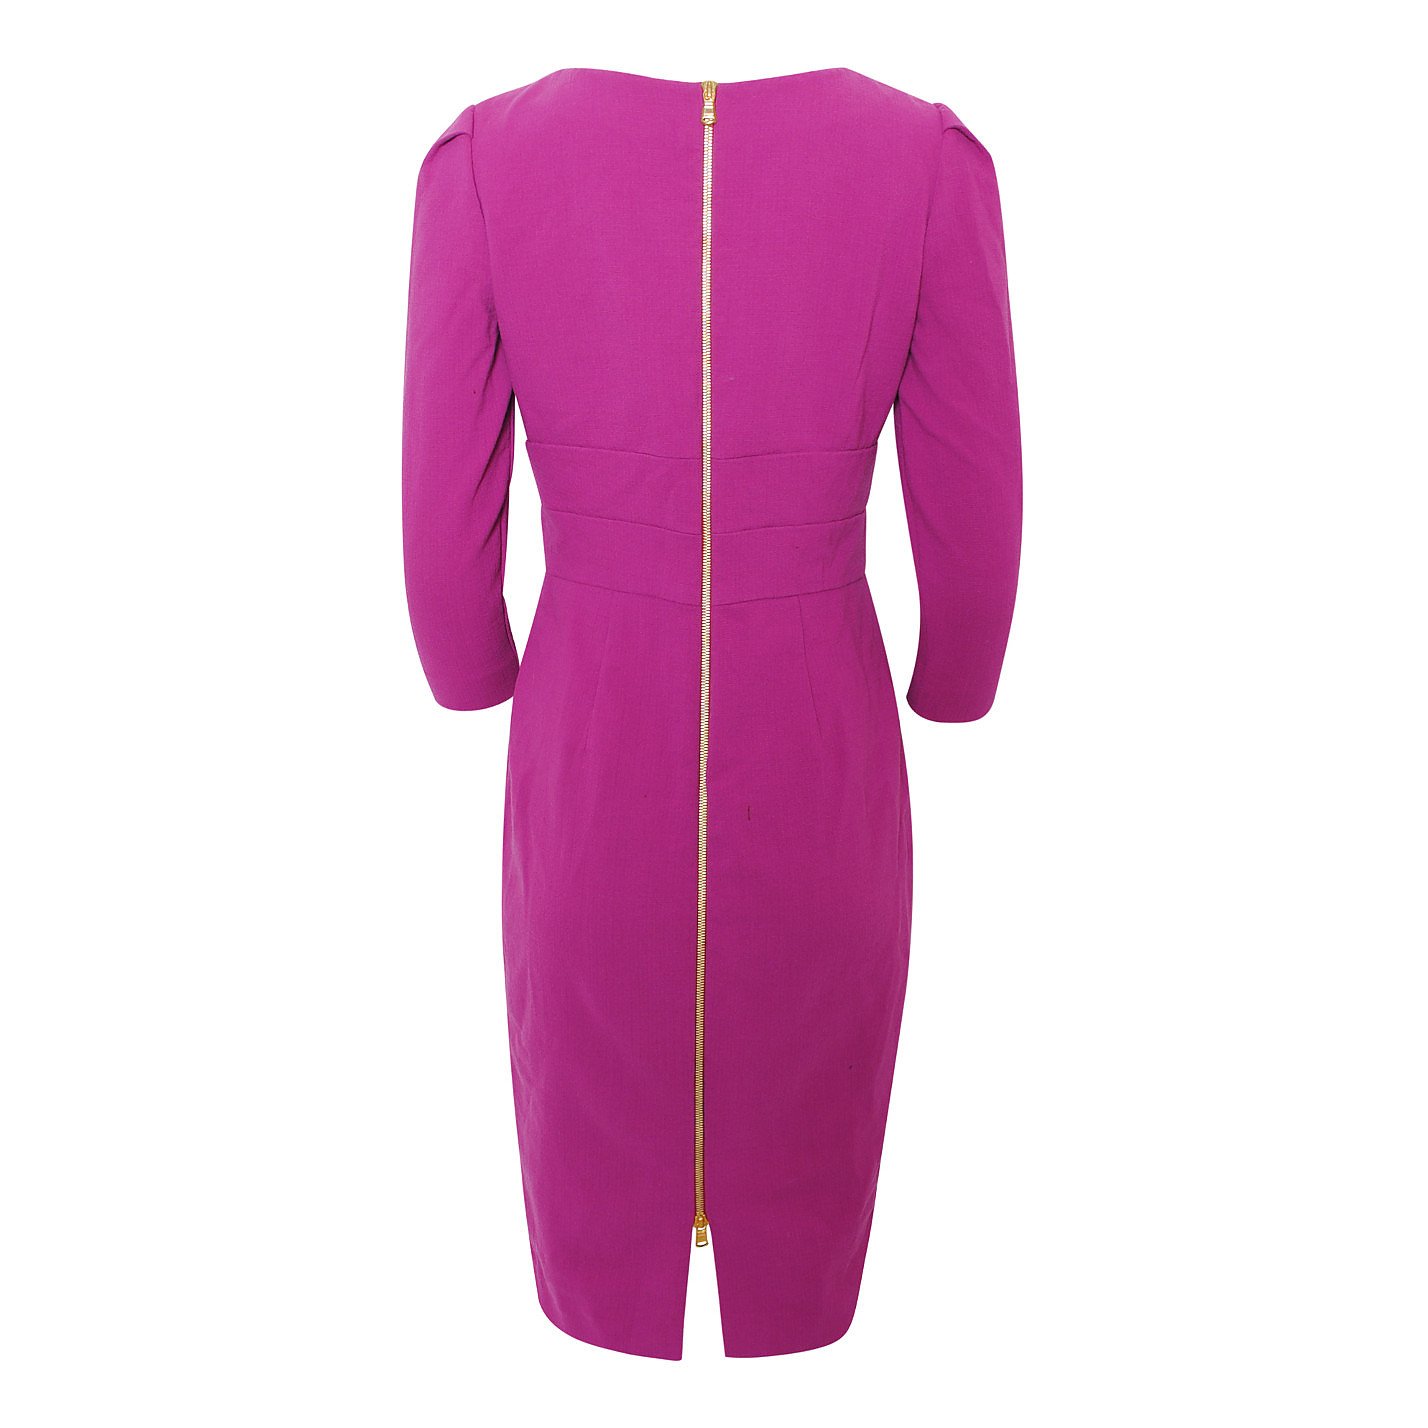 Emilio Pucci Fitted V-Neck Dress